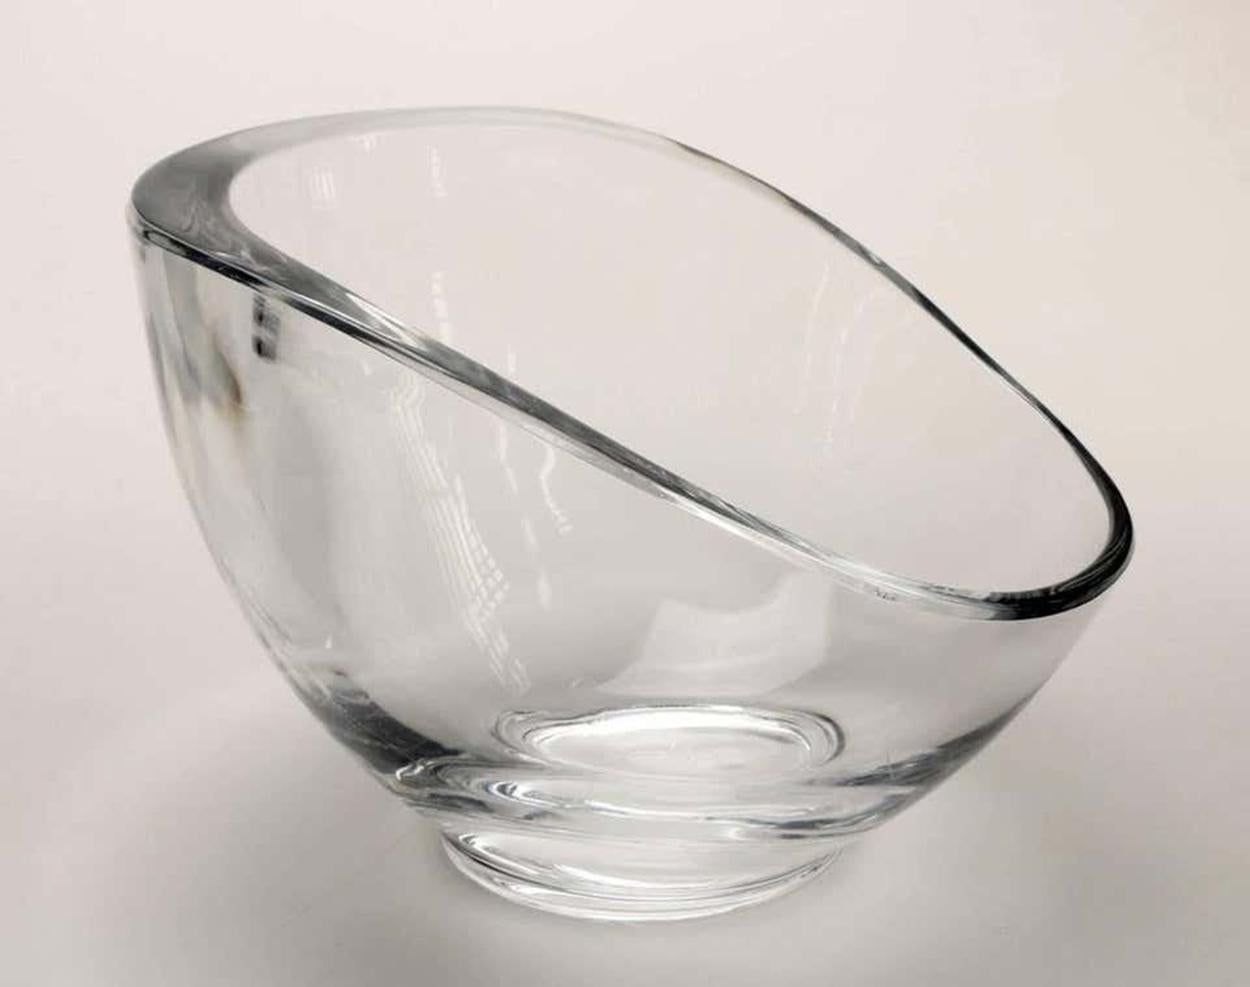 American Stunning and Unique Free-Form Lucite Serving Bowl by Herb Ritts